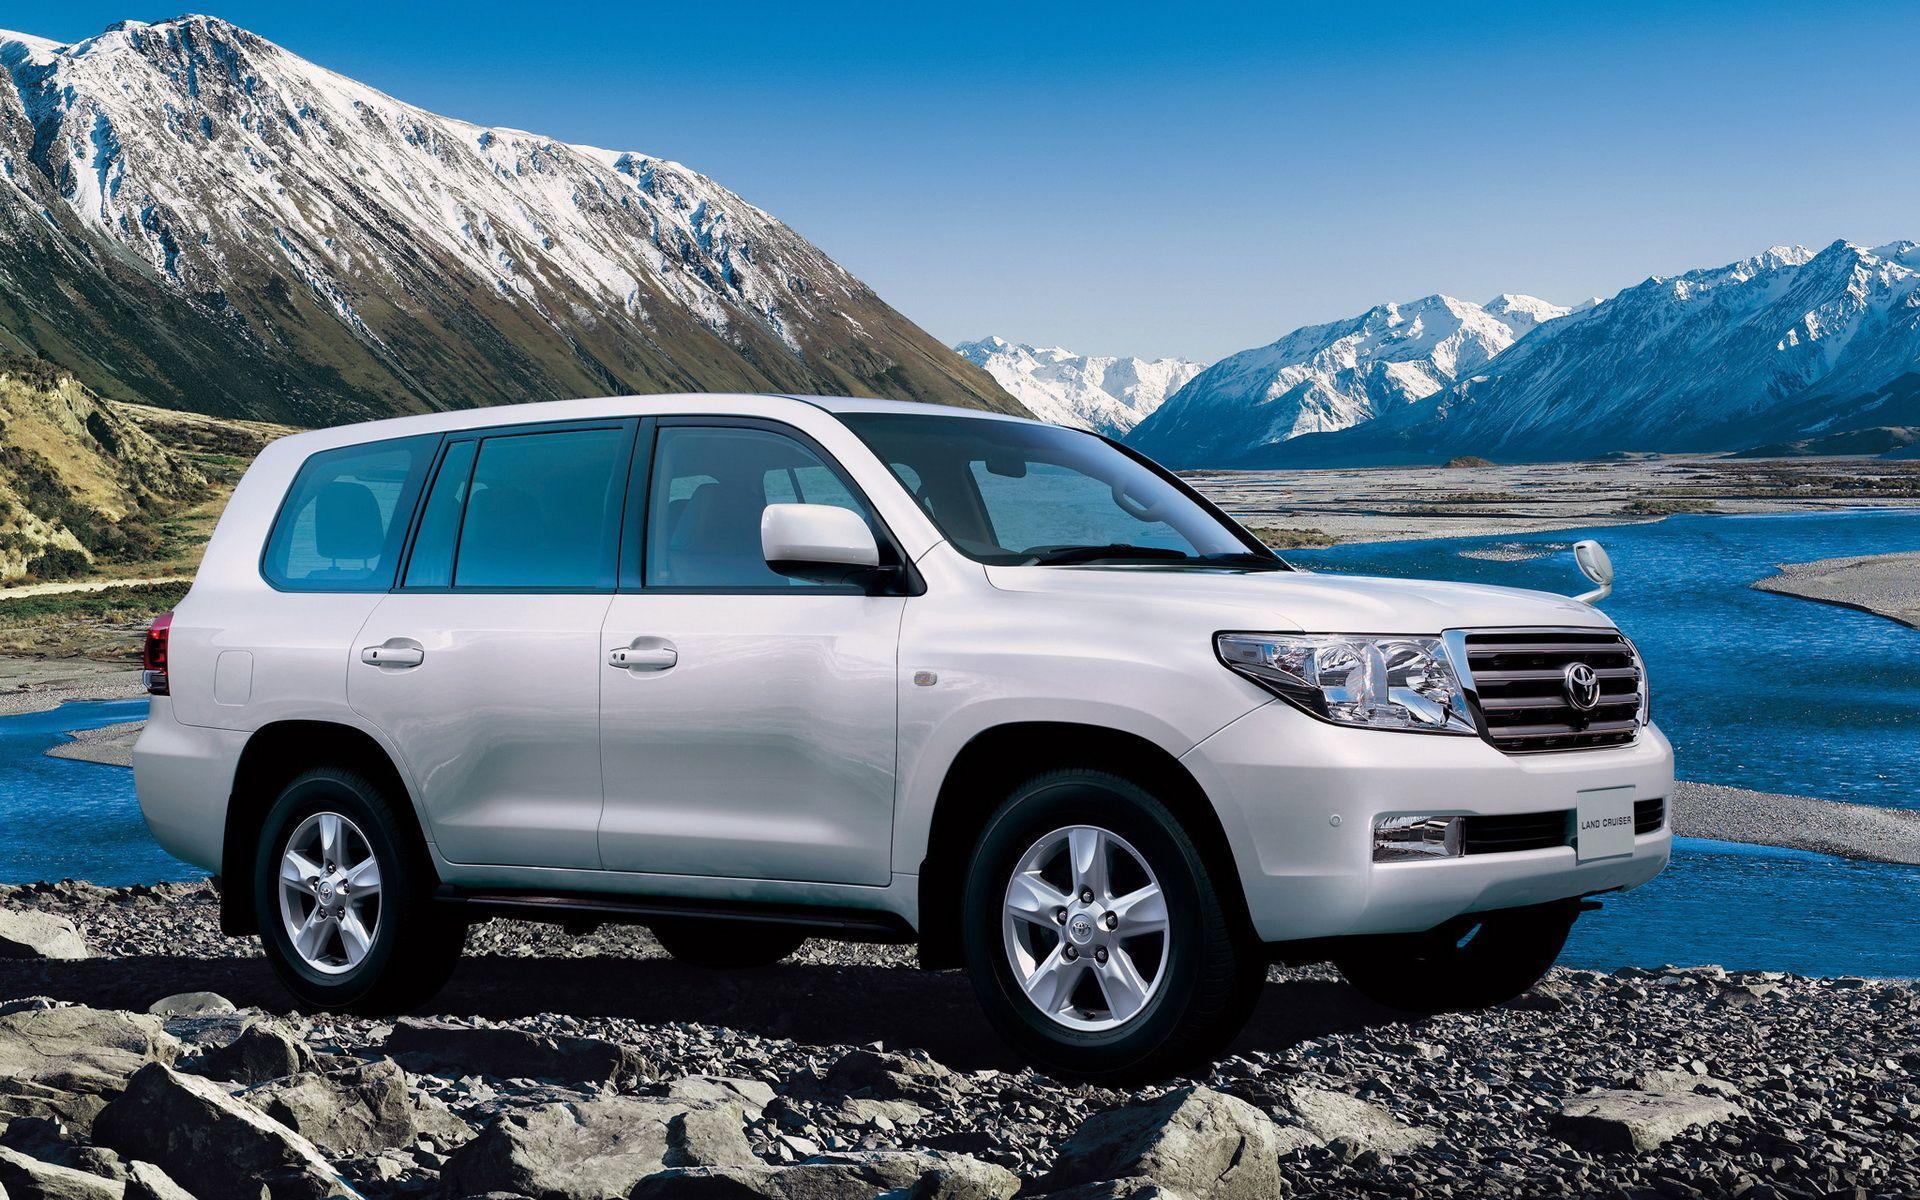 Toyota Land Cruiser 200 wallpapers and image